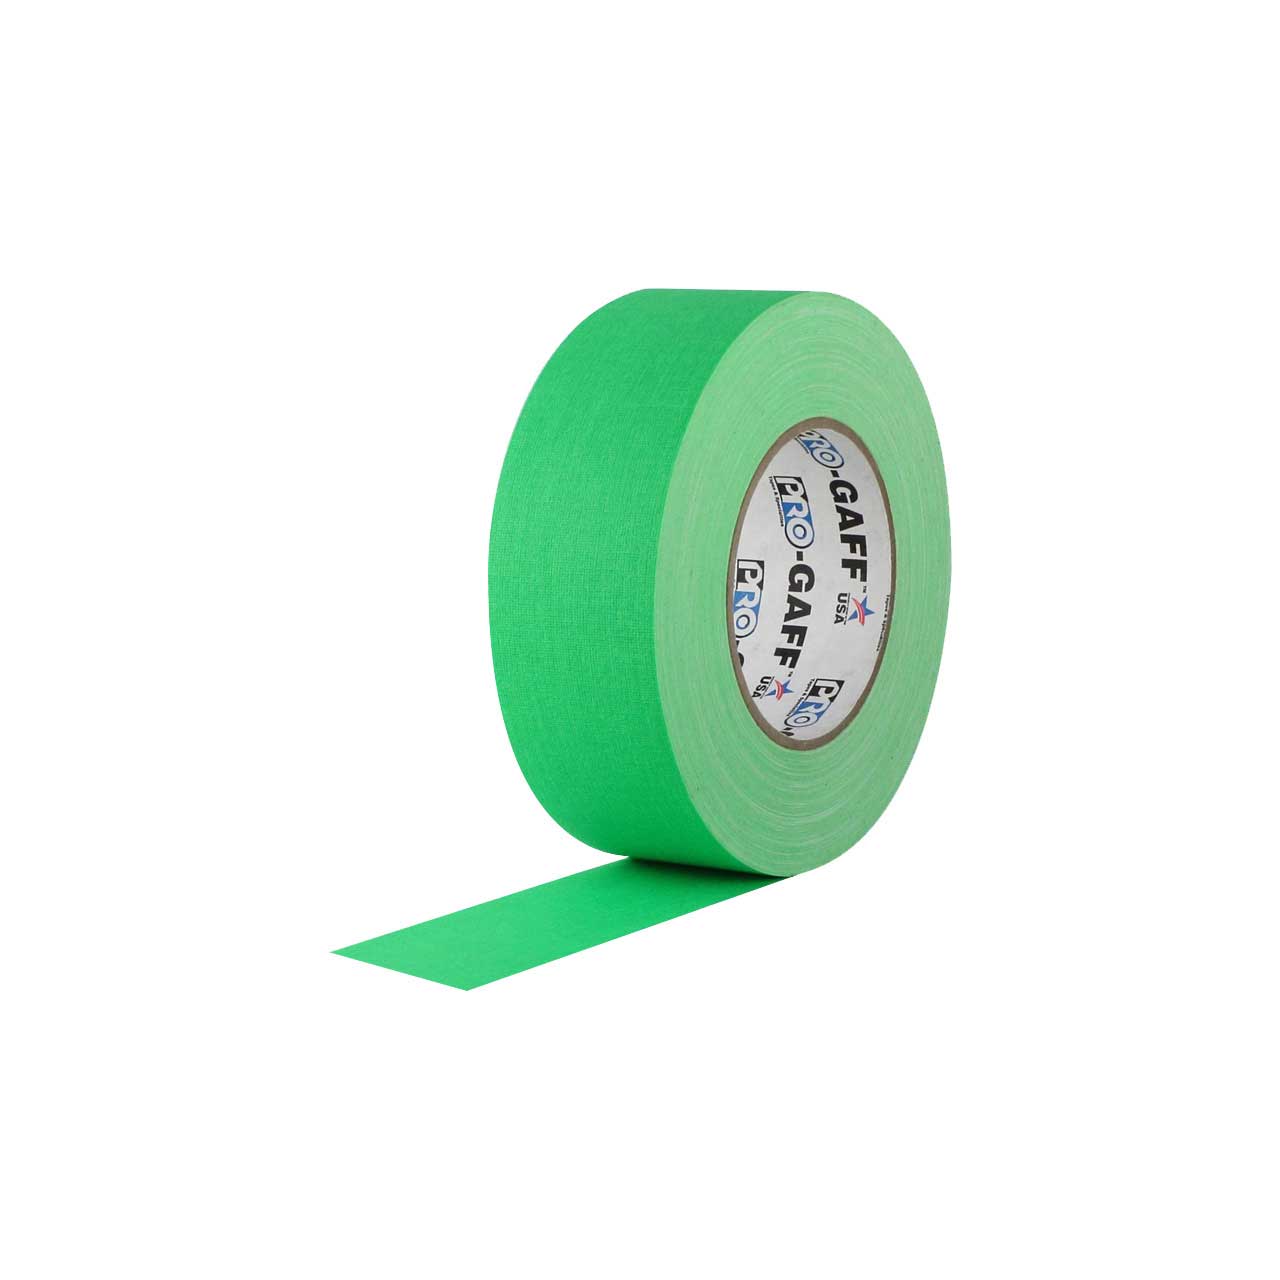 Pro Gaff White Gaffers Tape 2 x 55 yd Roll - Monkey Wrench